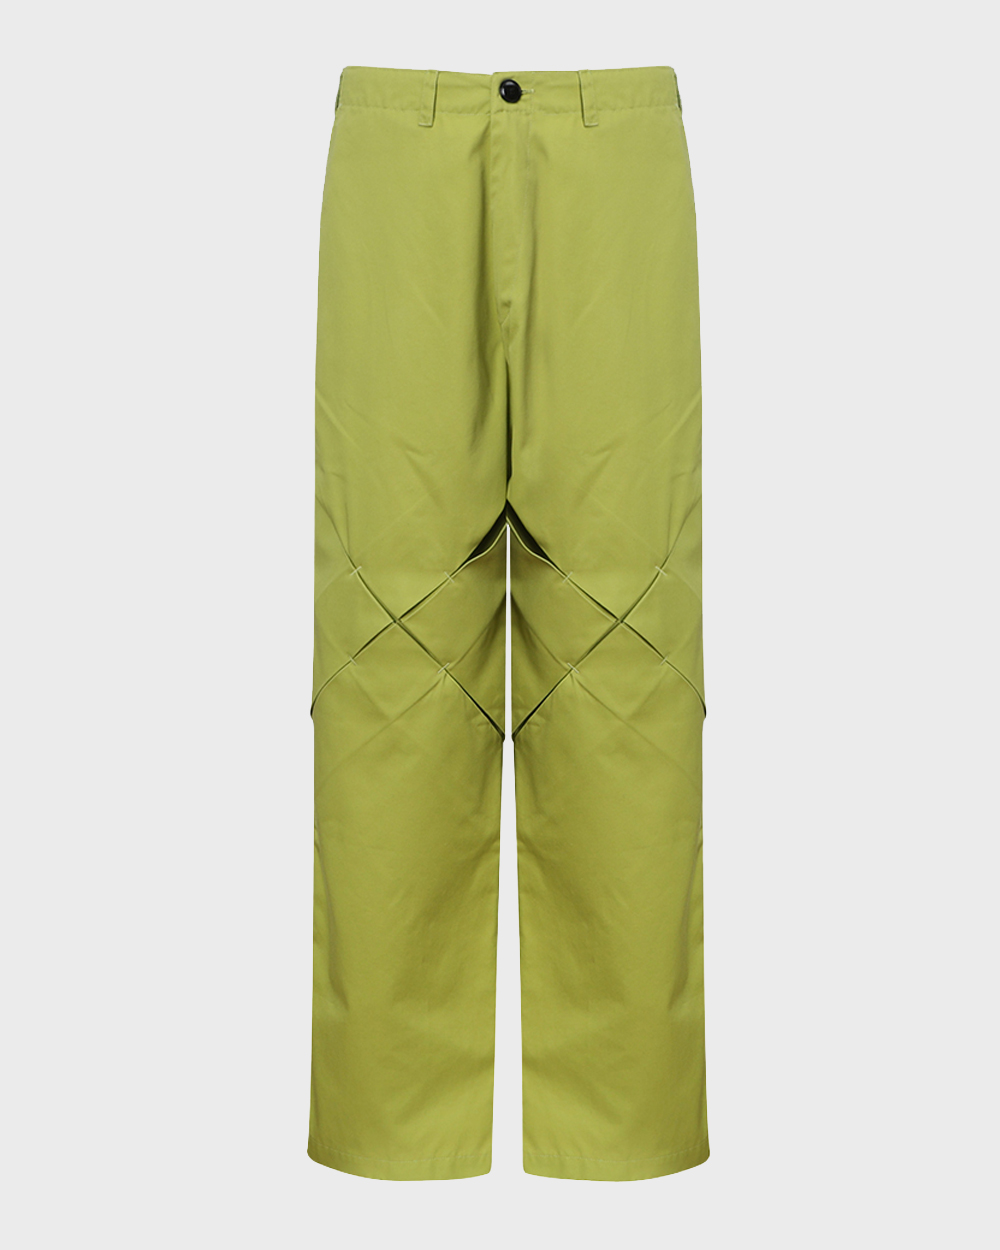 X French Work Trousers (Lime)